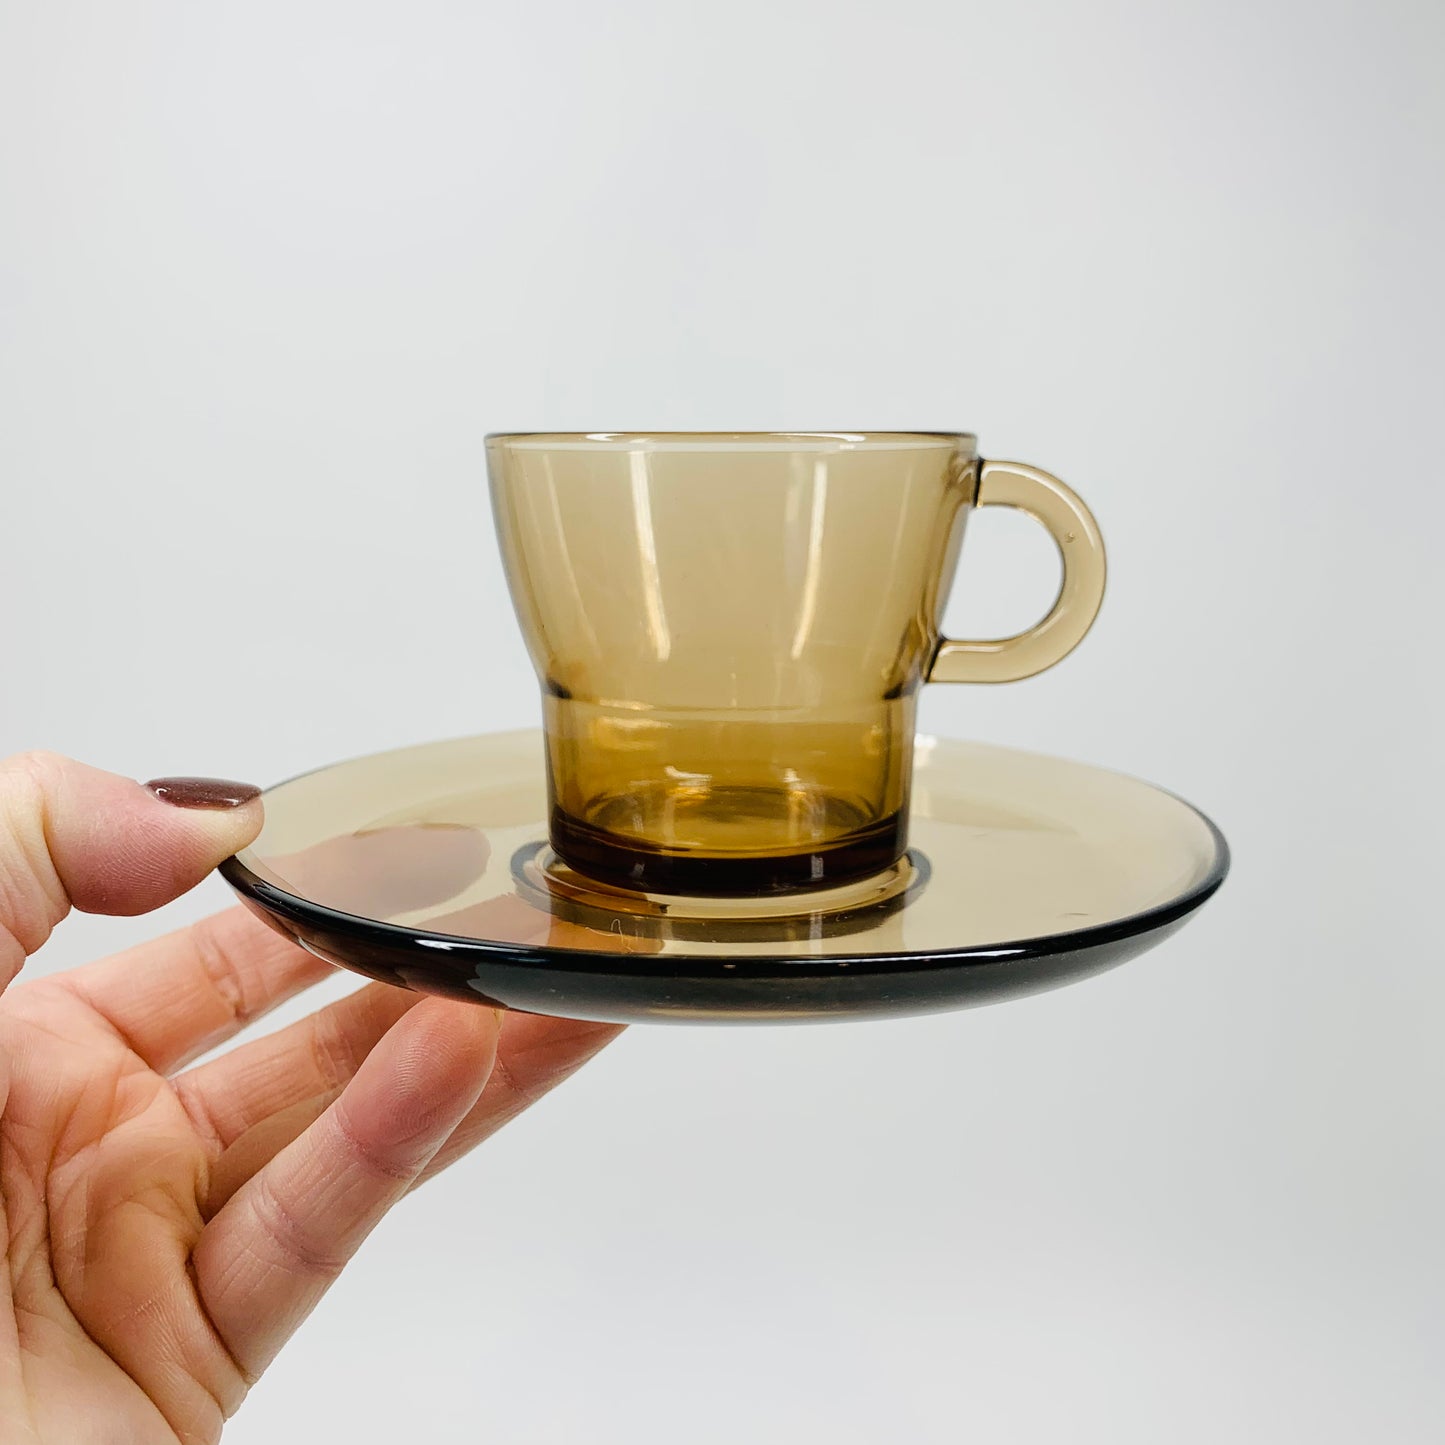 Vintage brown Duralex glass espresso cup and matching saucer